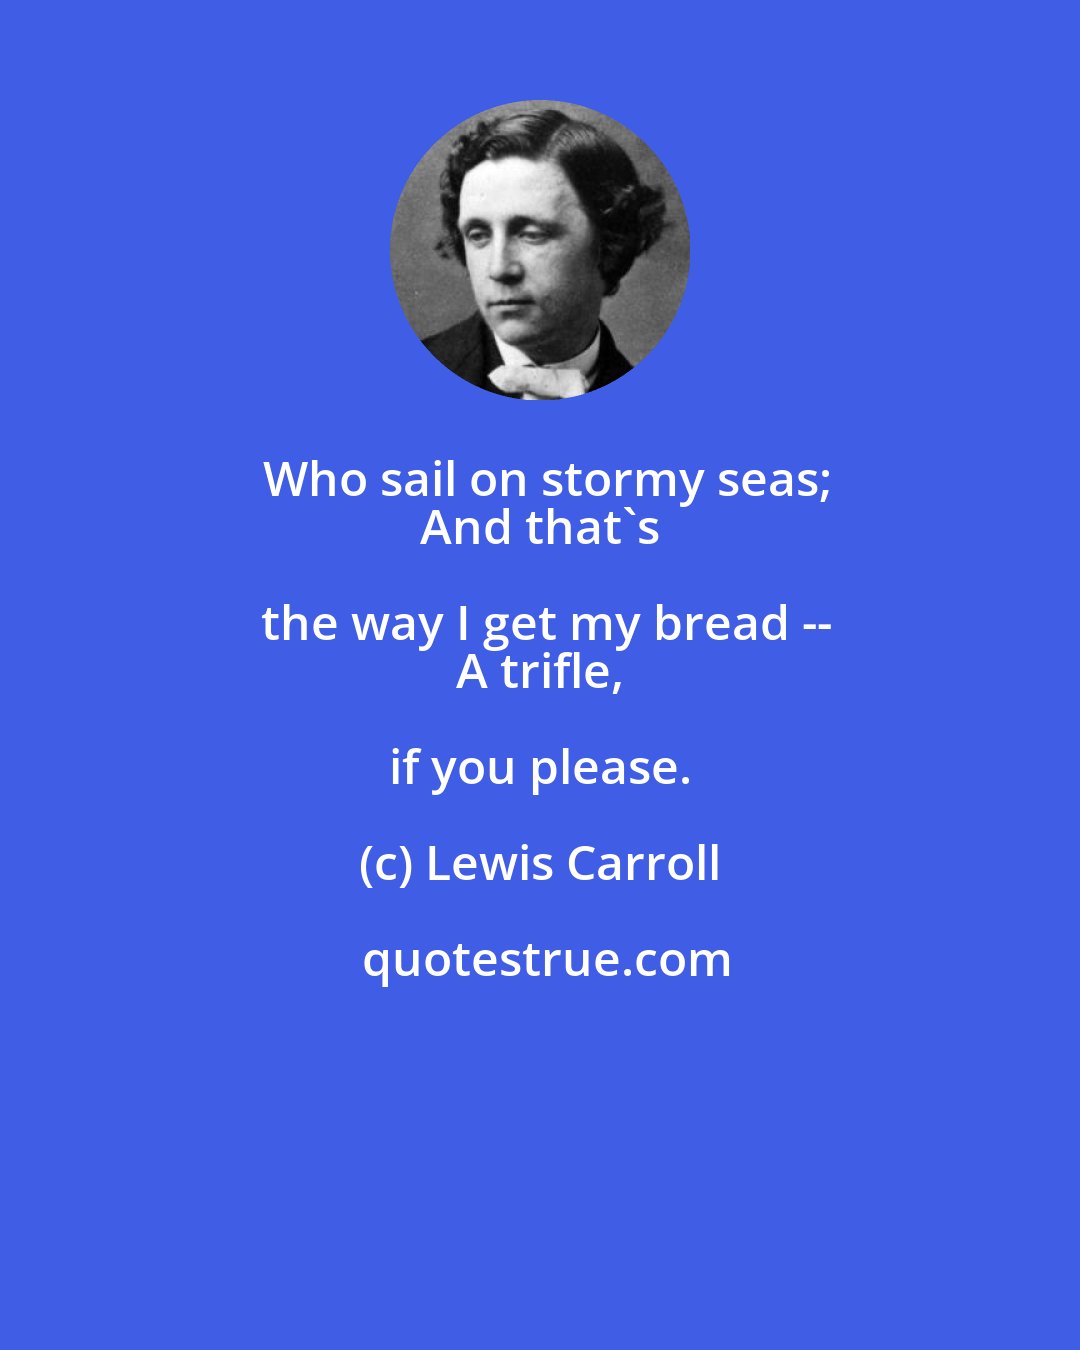 Lewis Carroll: Who sail on stormy seas;
 And that's the way I get my bread --
 A trifle, if you please.